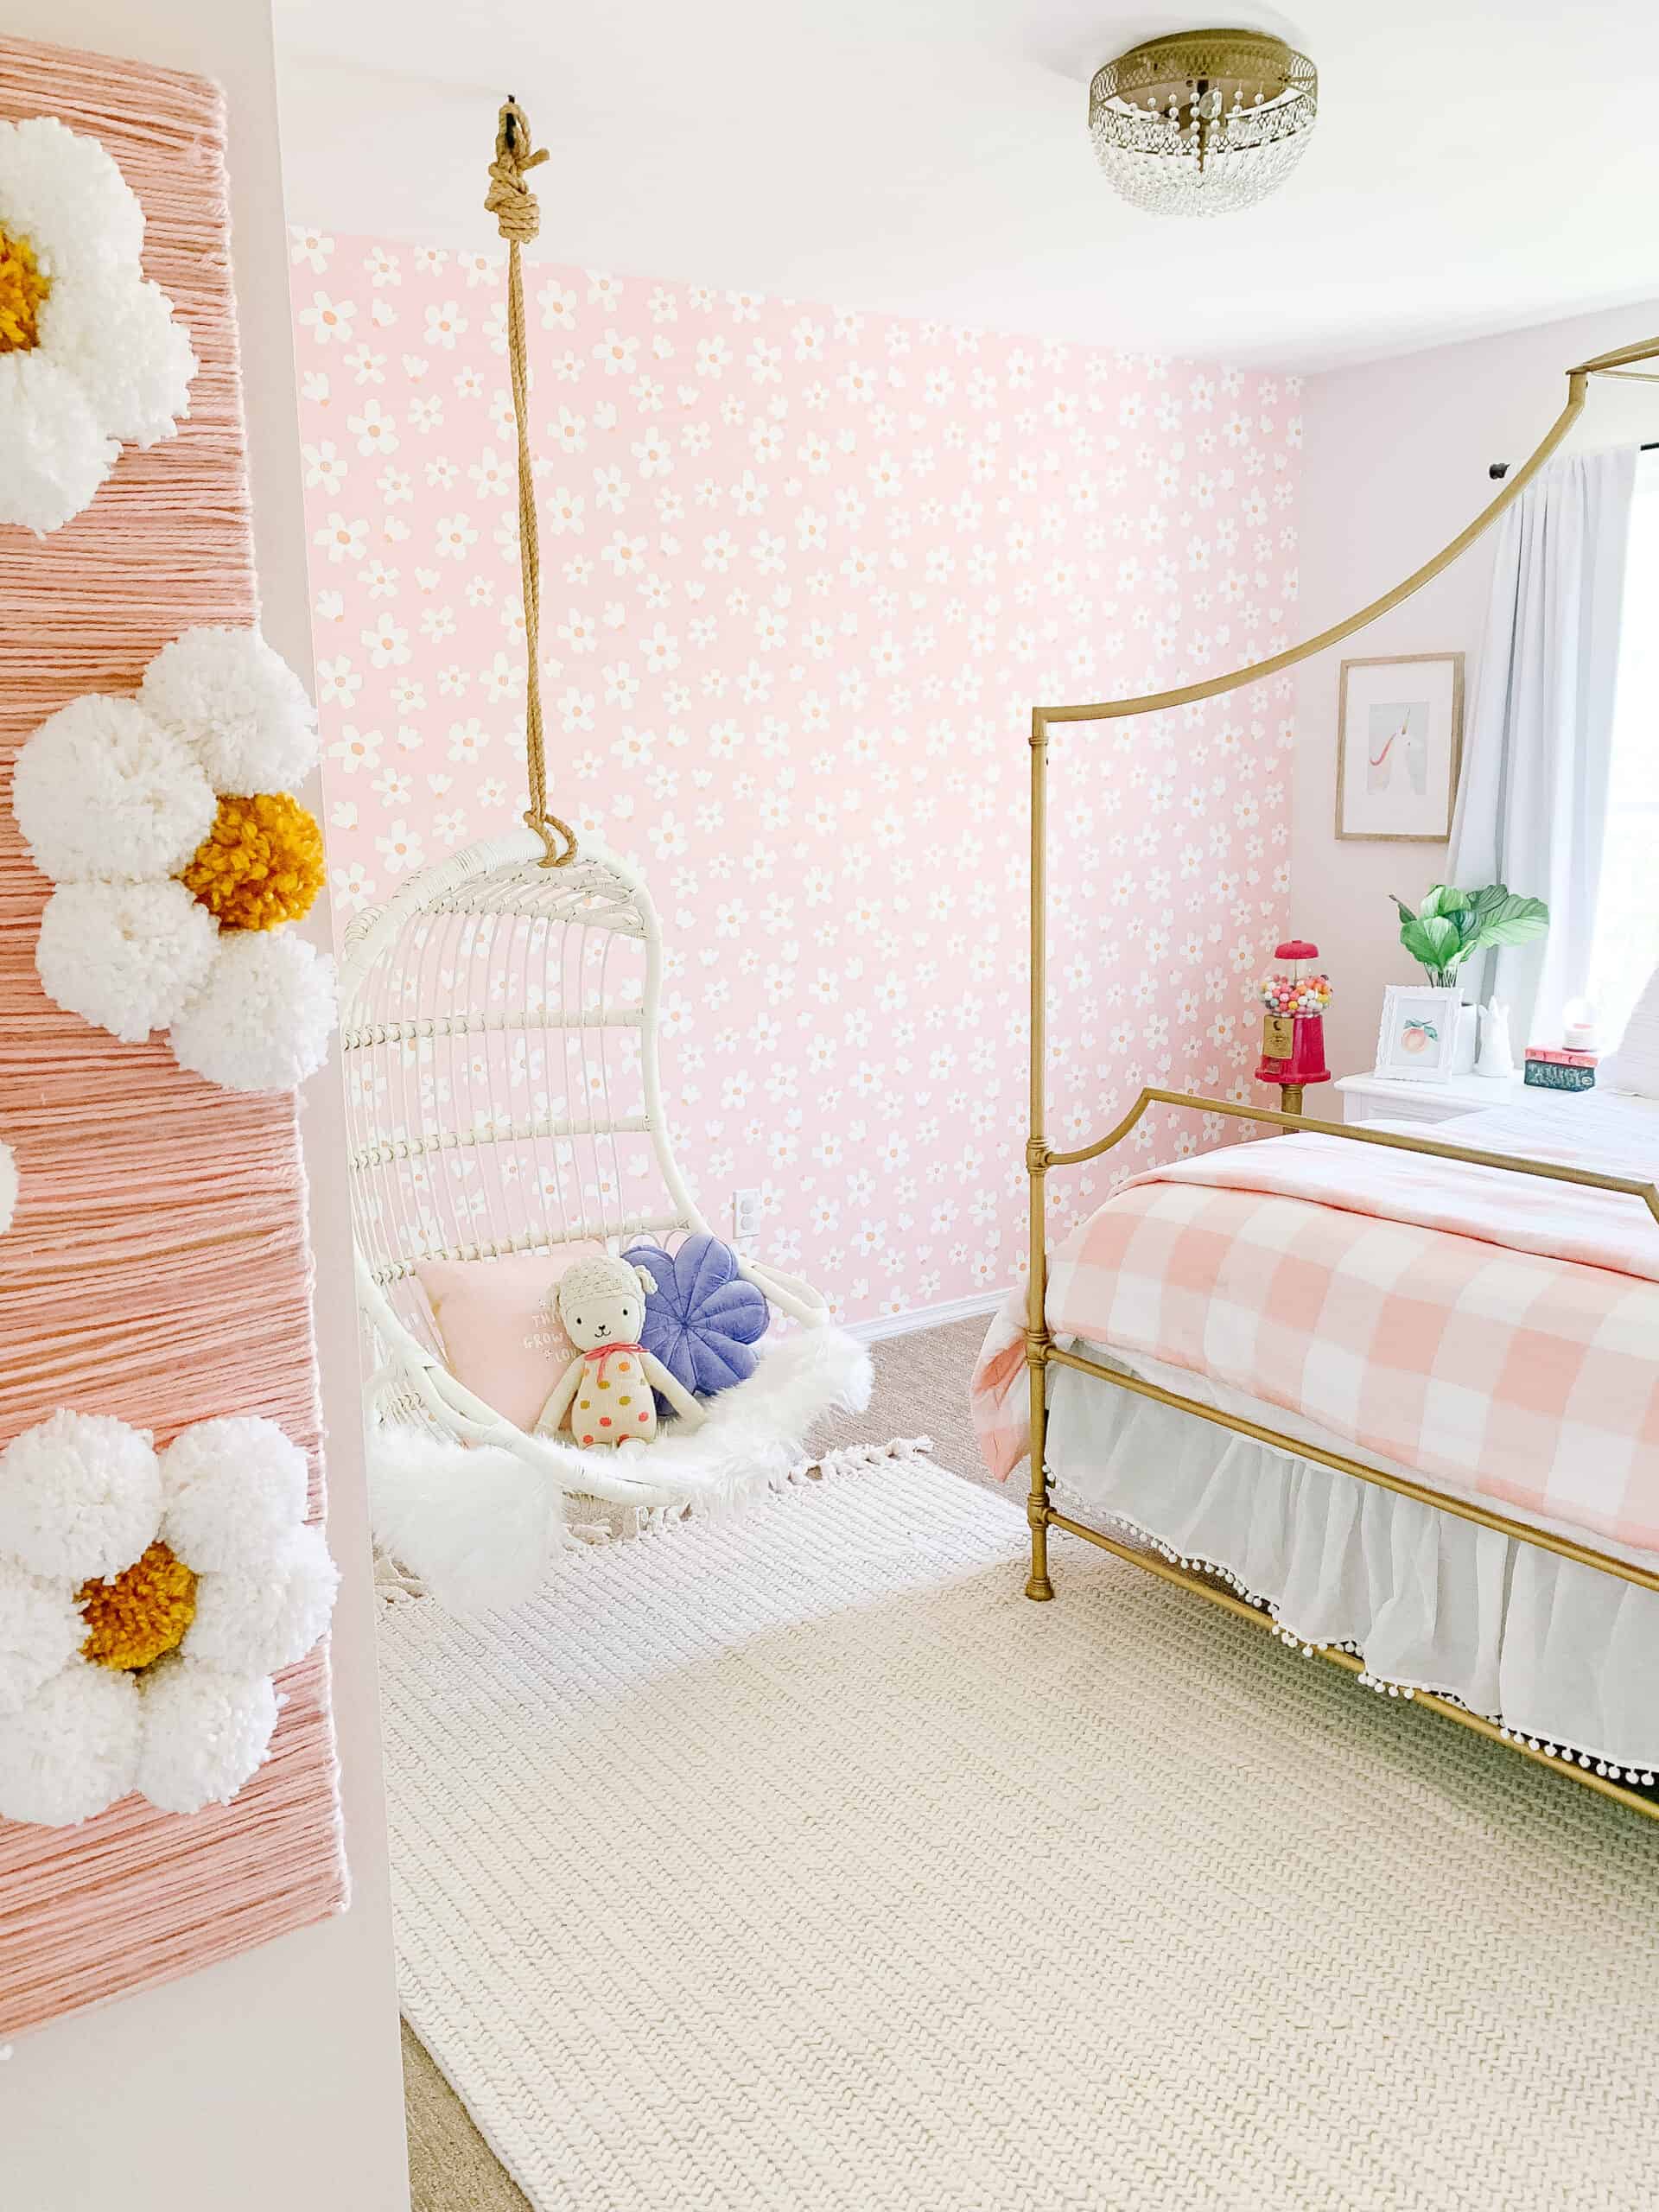 Daisy Wallpaper for a Girl's Room - arinsolangeathome